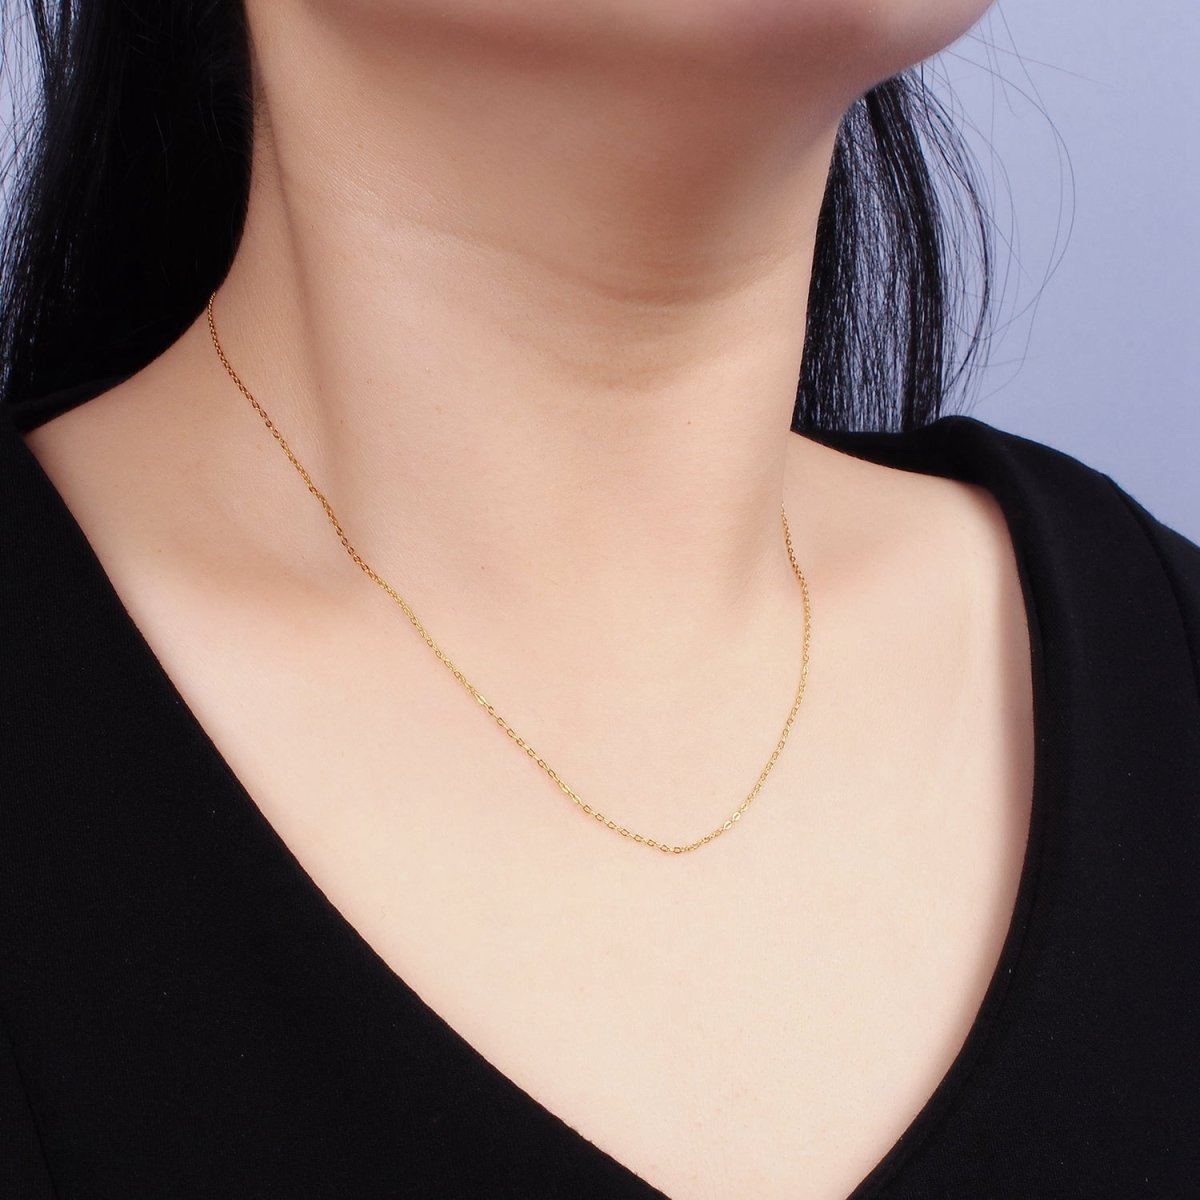 Dainty 24K Gold Vermeil Cable Chain Necklace 925 Sterling Silver Necklace Chain w/ Heavy 24K Gold Plated 15.35 inch | WA-1980 Clearance Pricing - DLUXCA